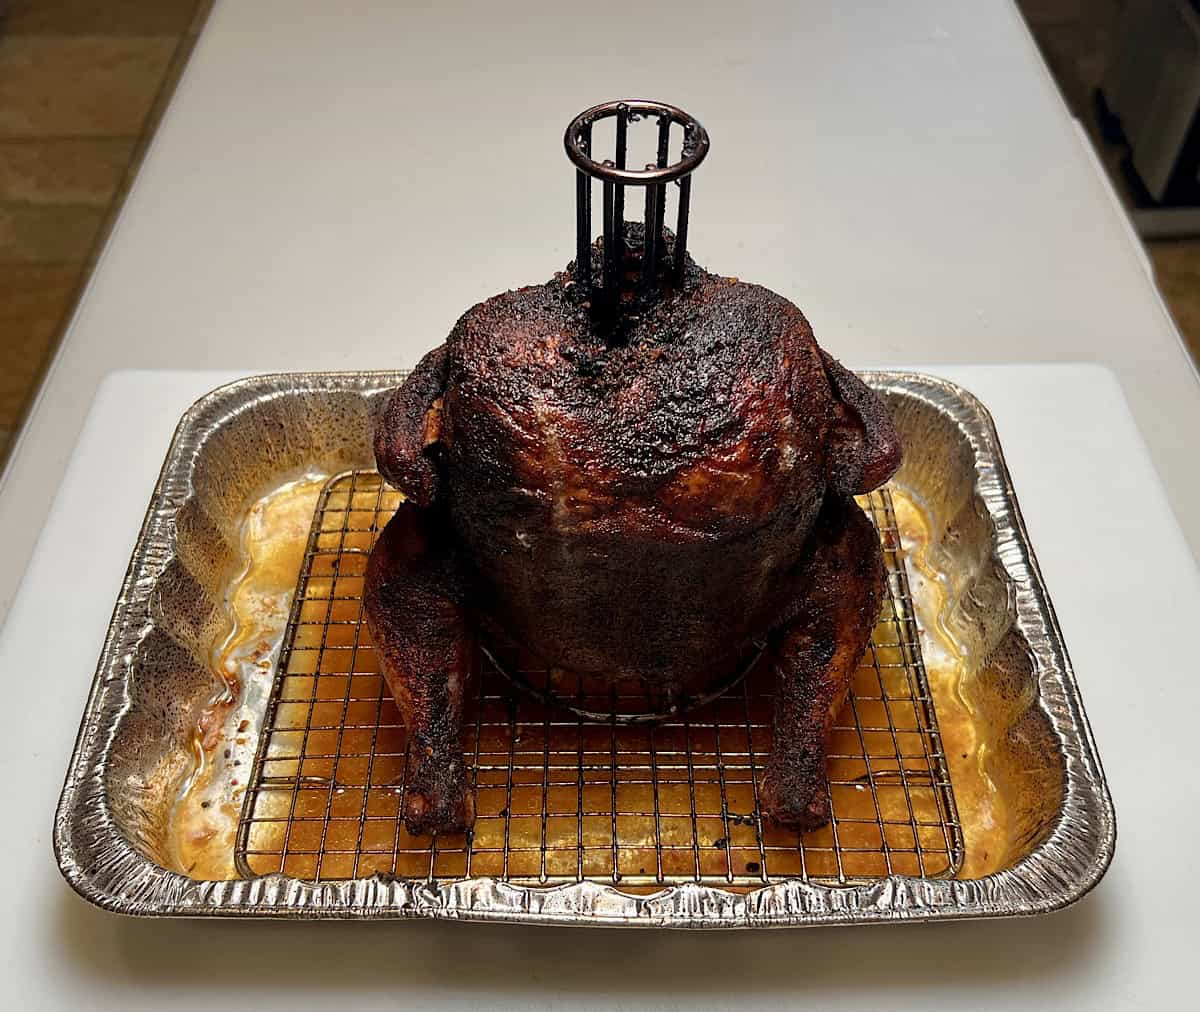 finished smoked chicken in drip pan